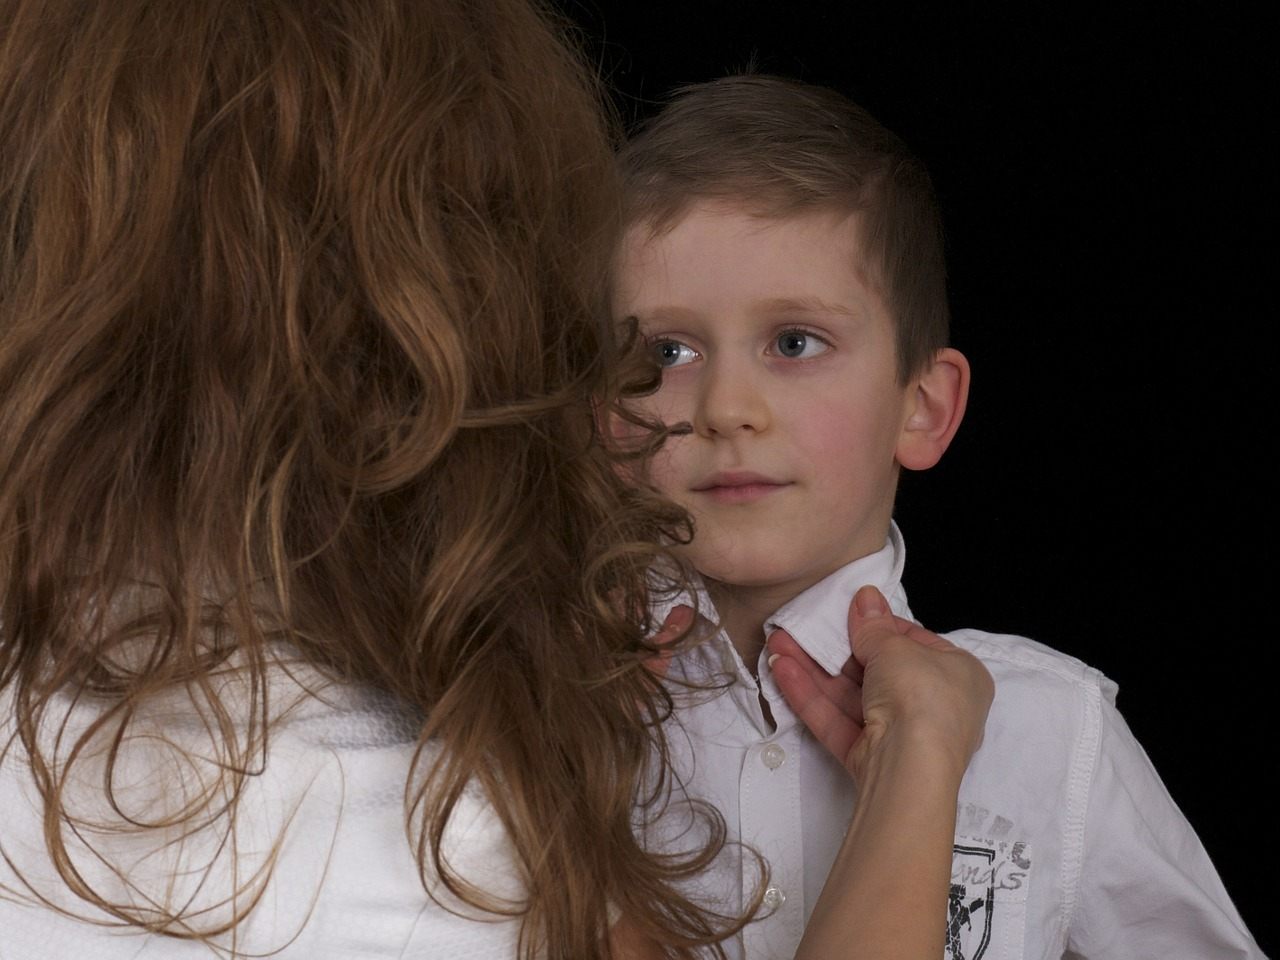 10 Things You Should Never Do to Your Children That You Think Are Acts of Love